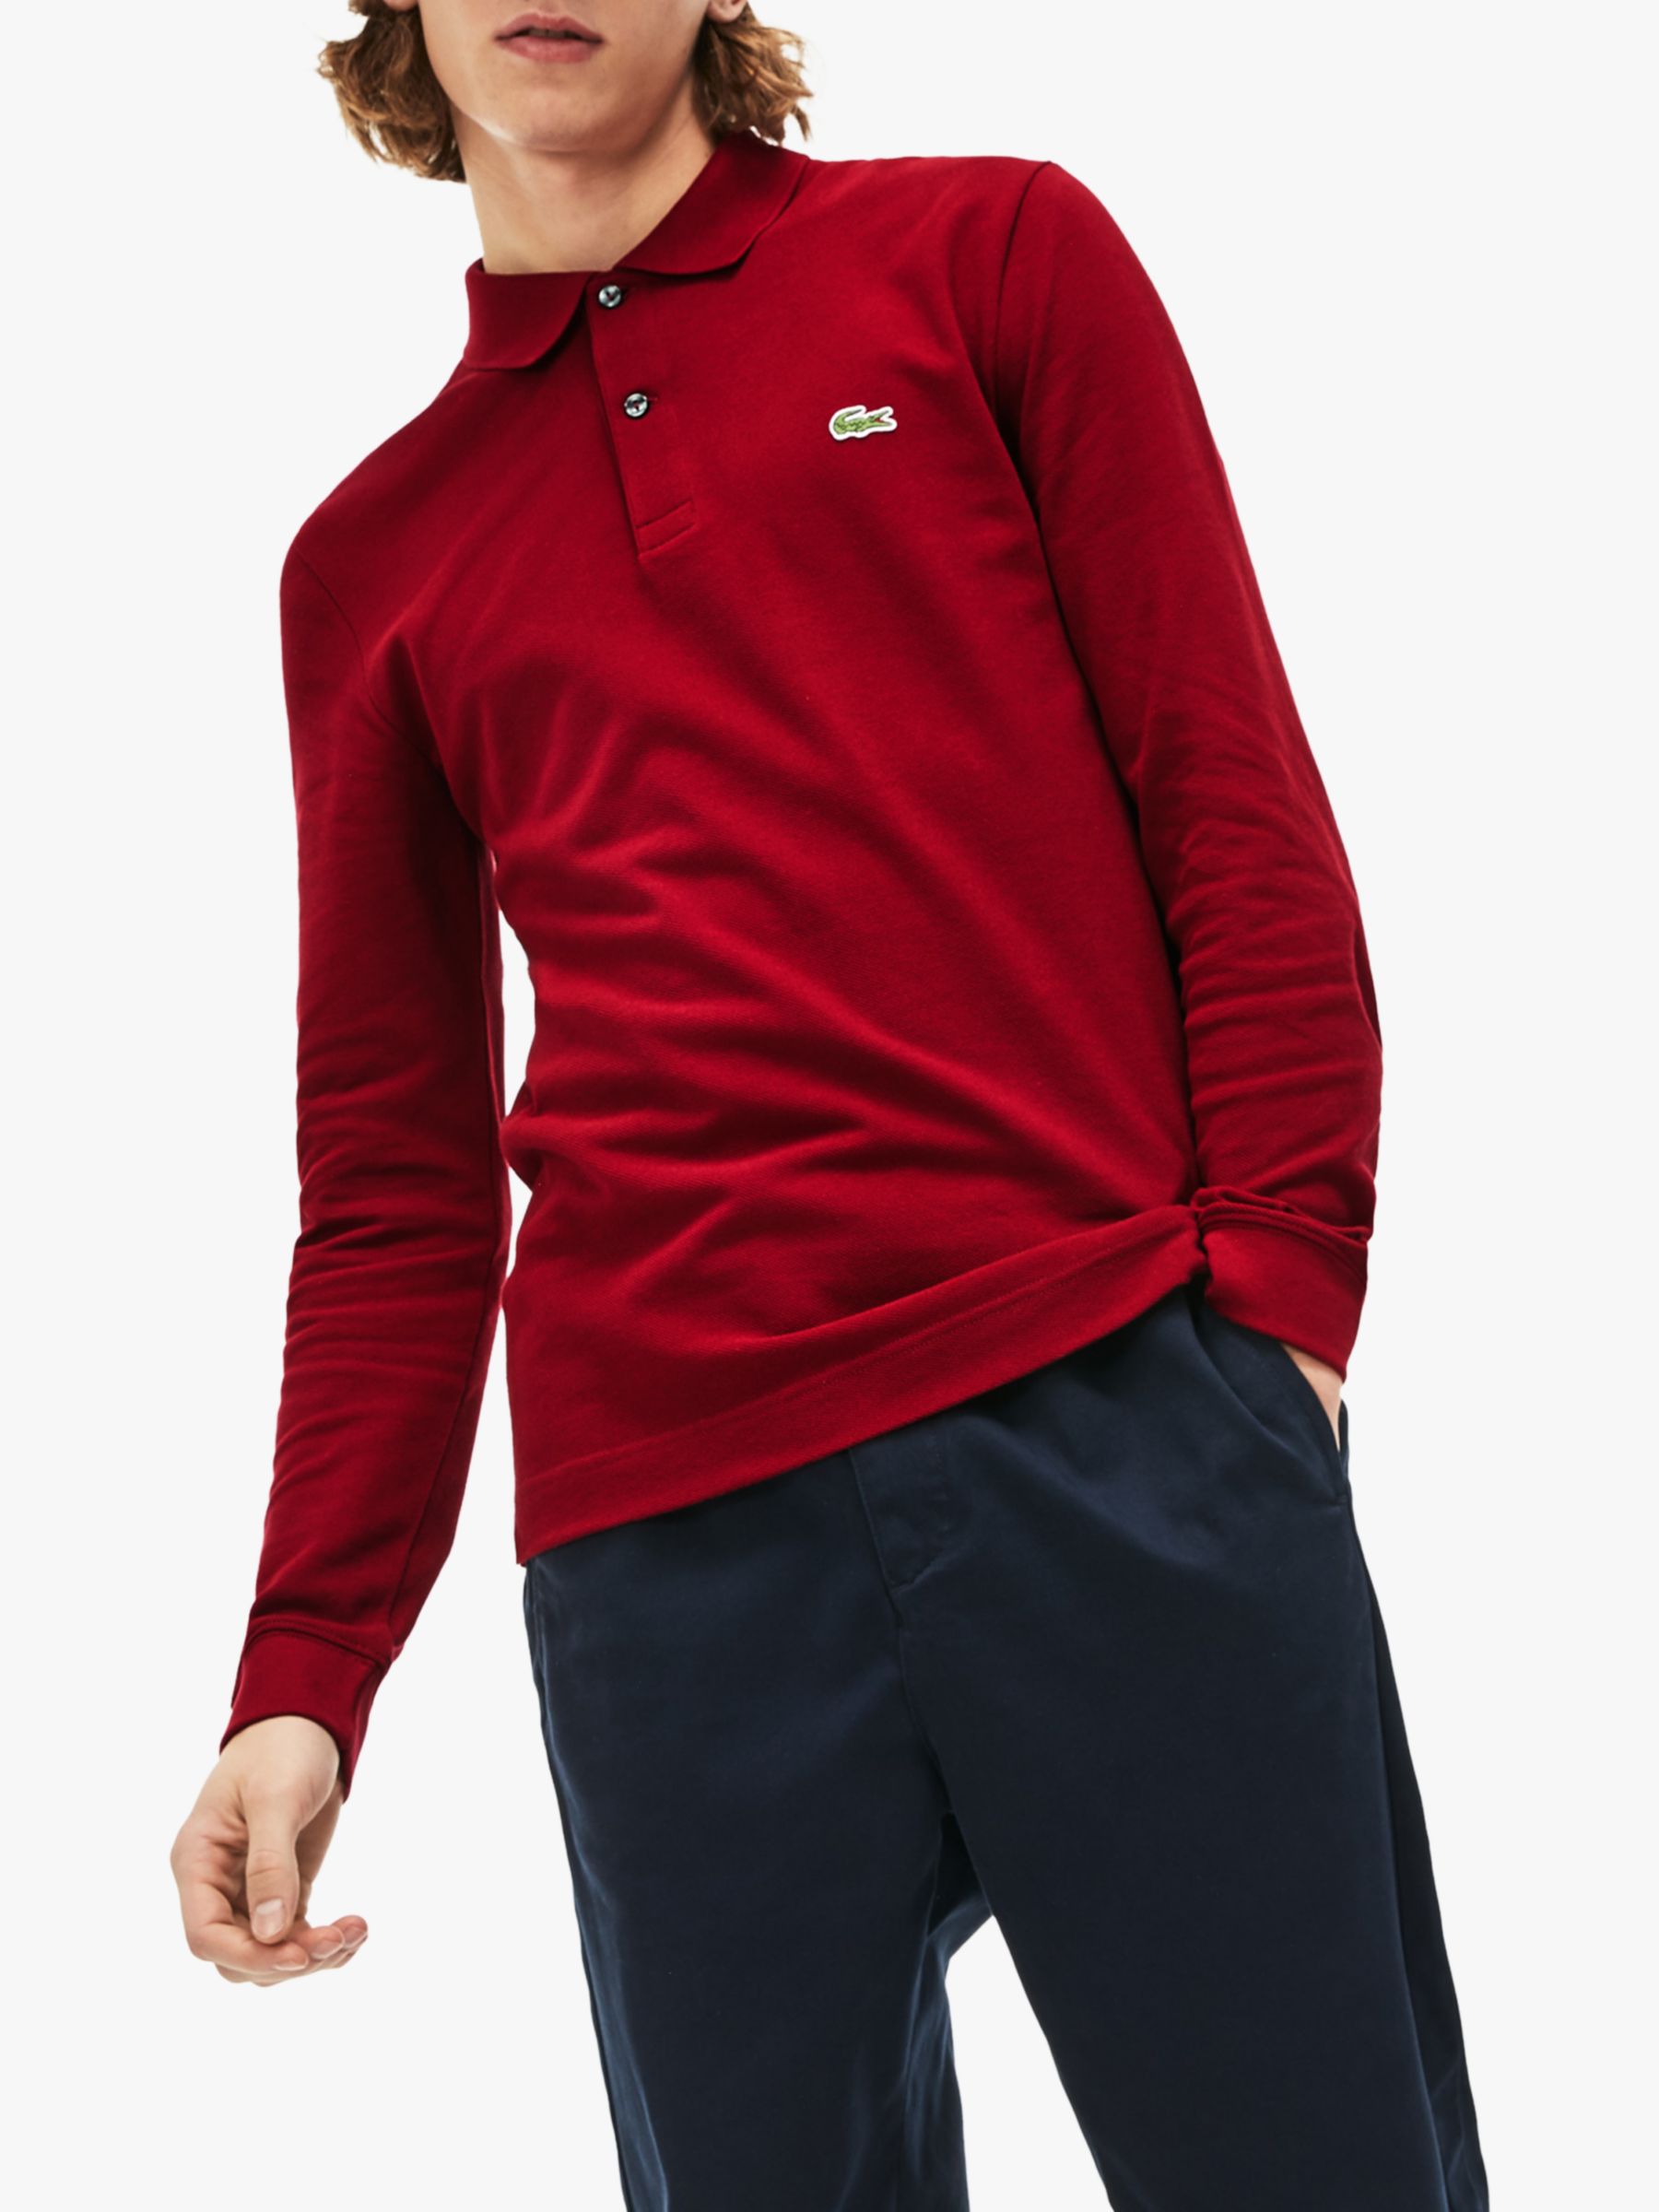 lacoste red long sleeve shirt